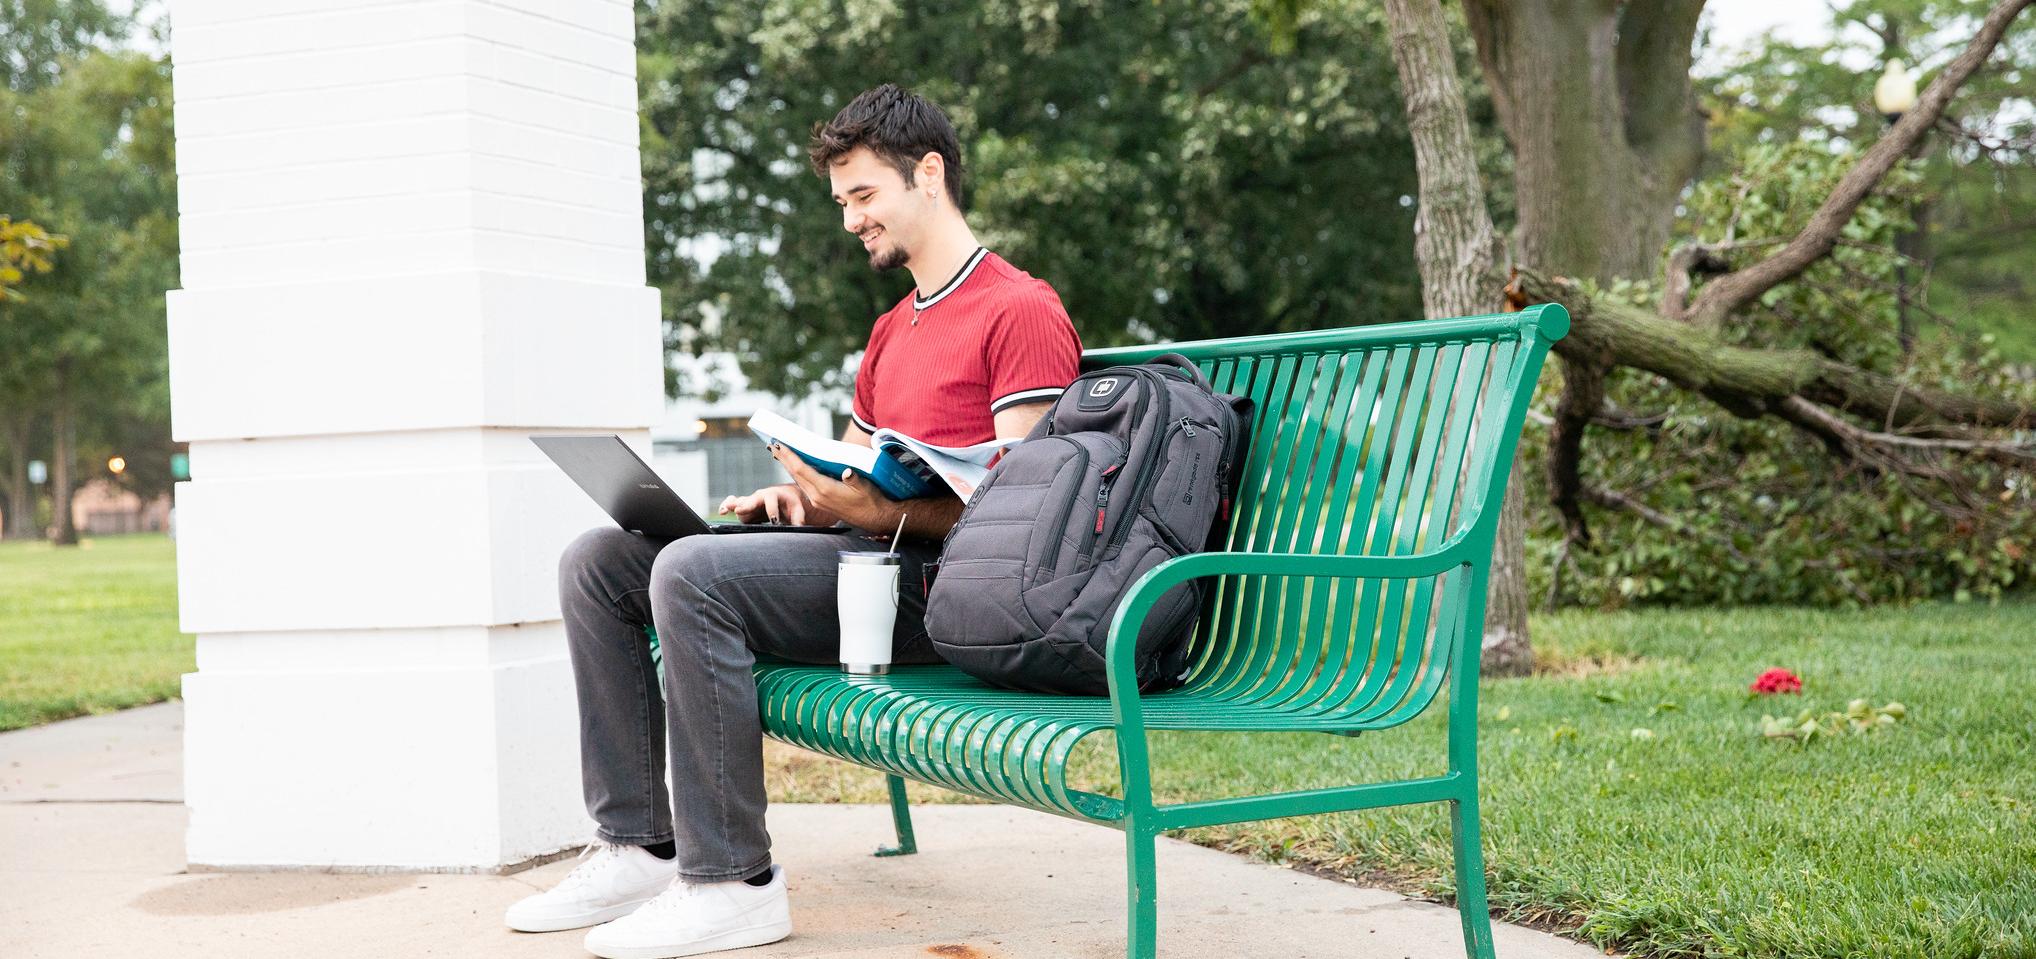 Student sitting on a green bench, holding book in hand while working on a laptop.